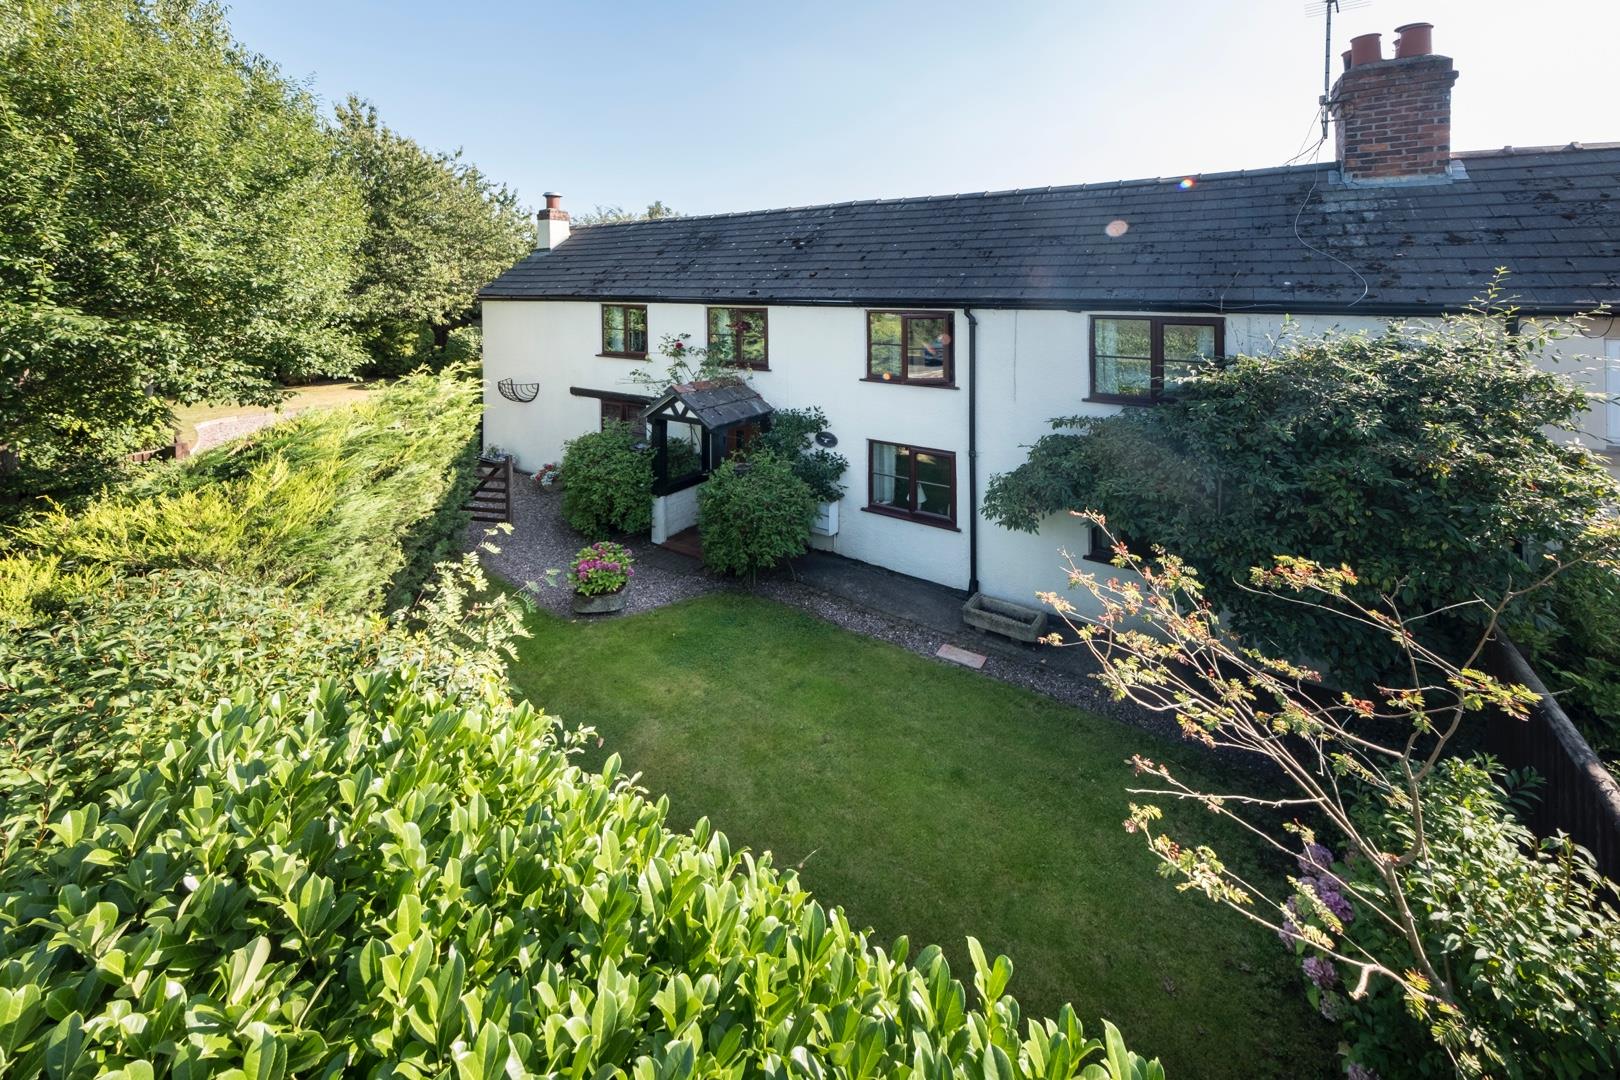 4 bedroom  End Terrace House for Sale in Clotton